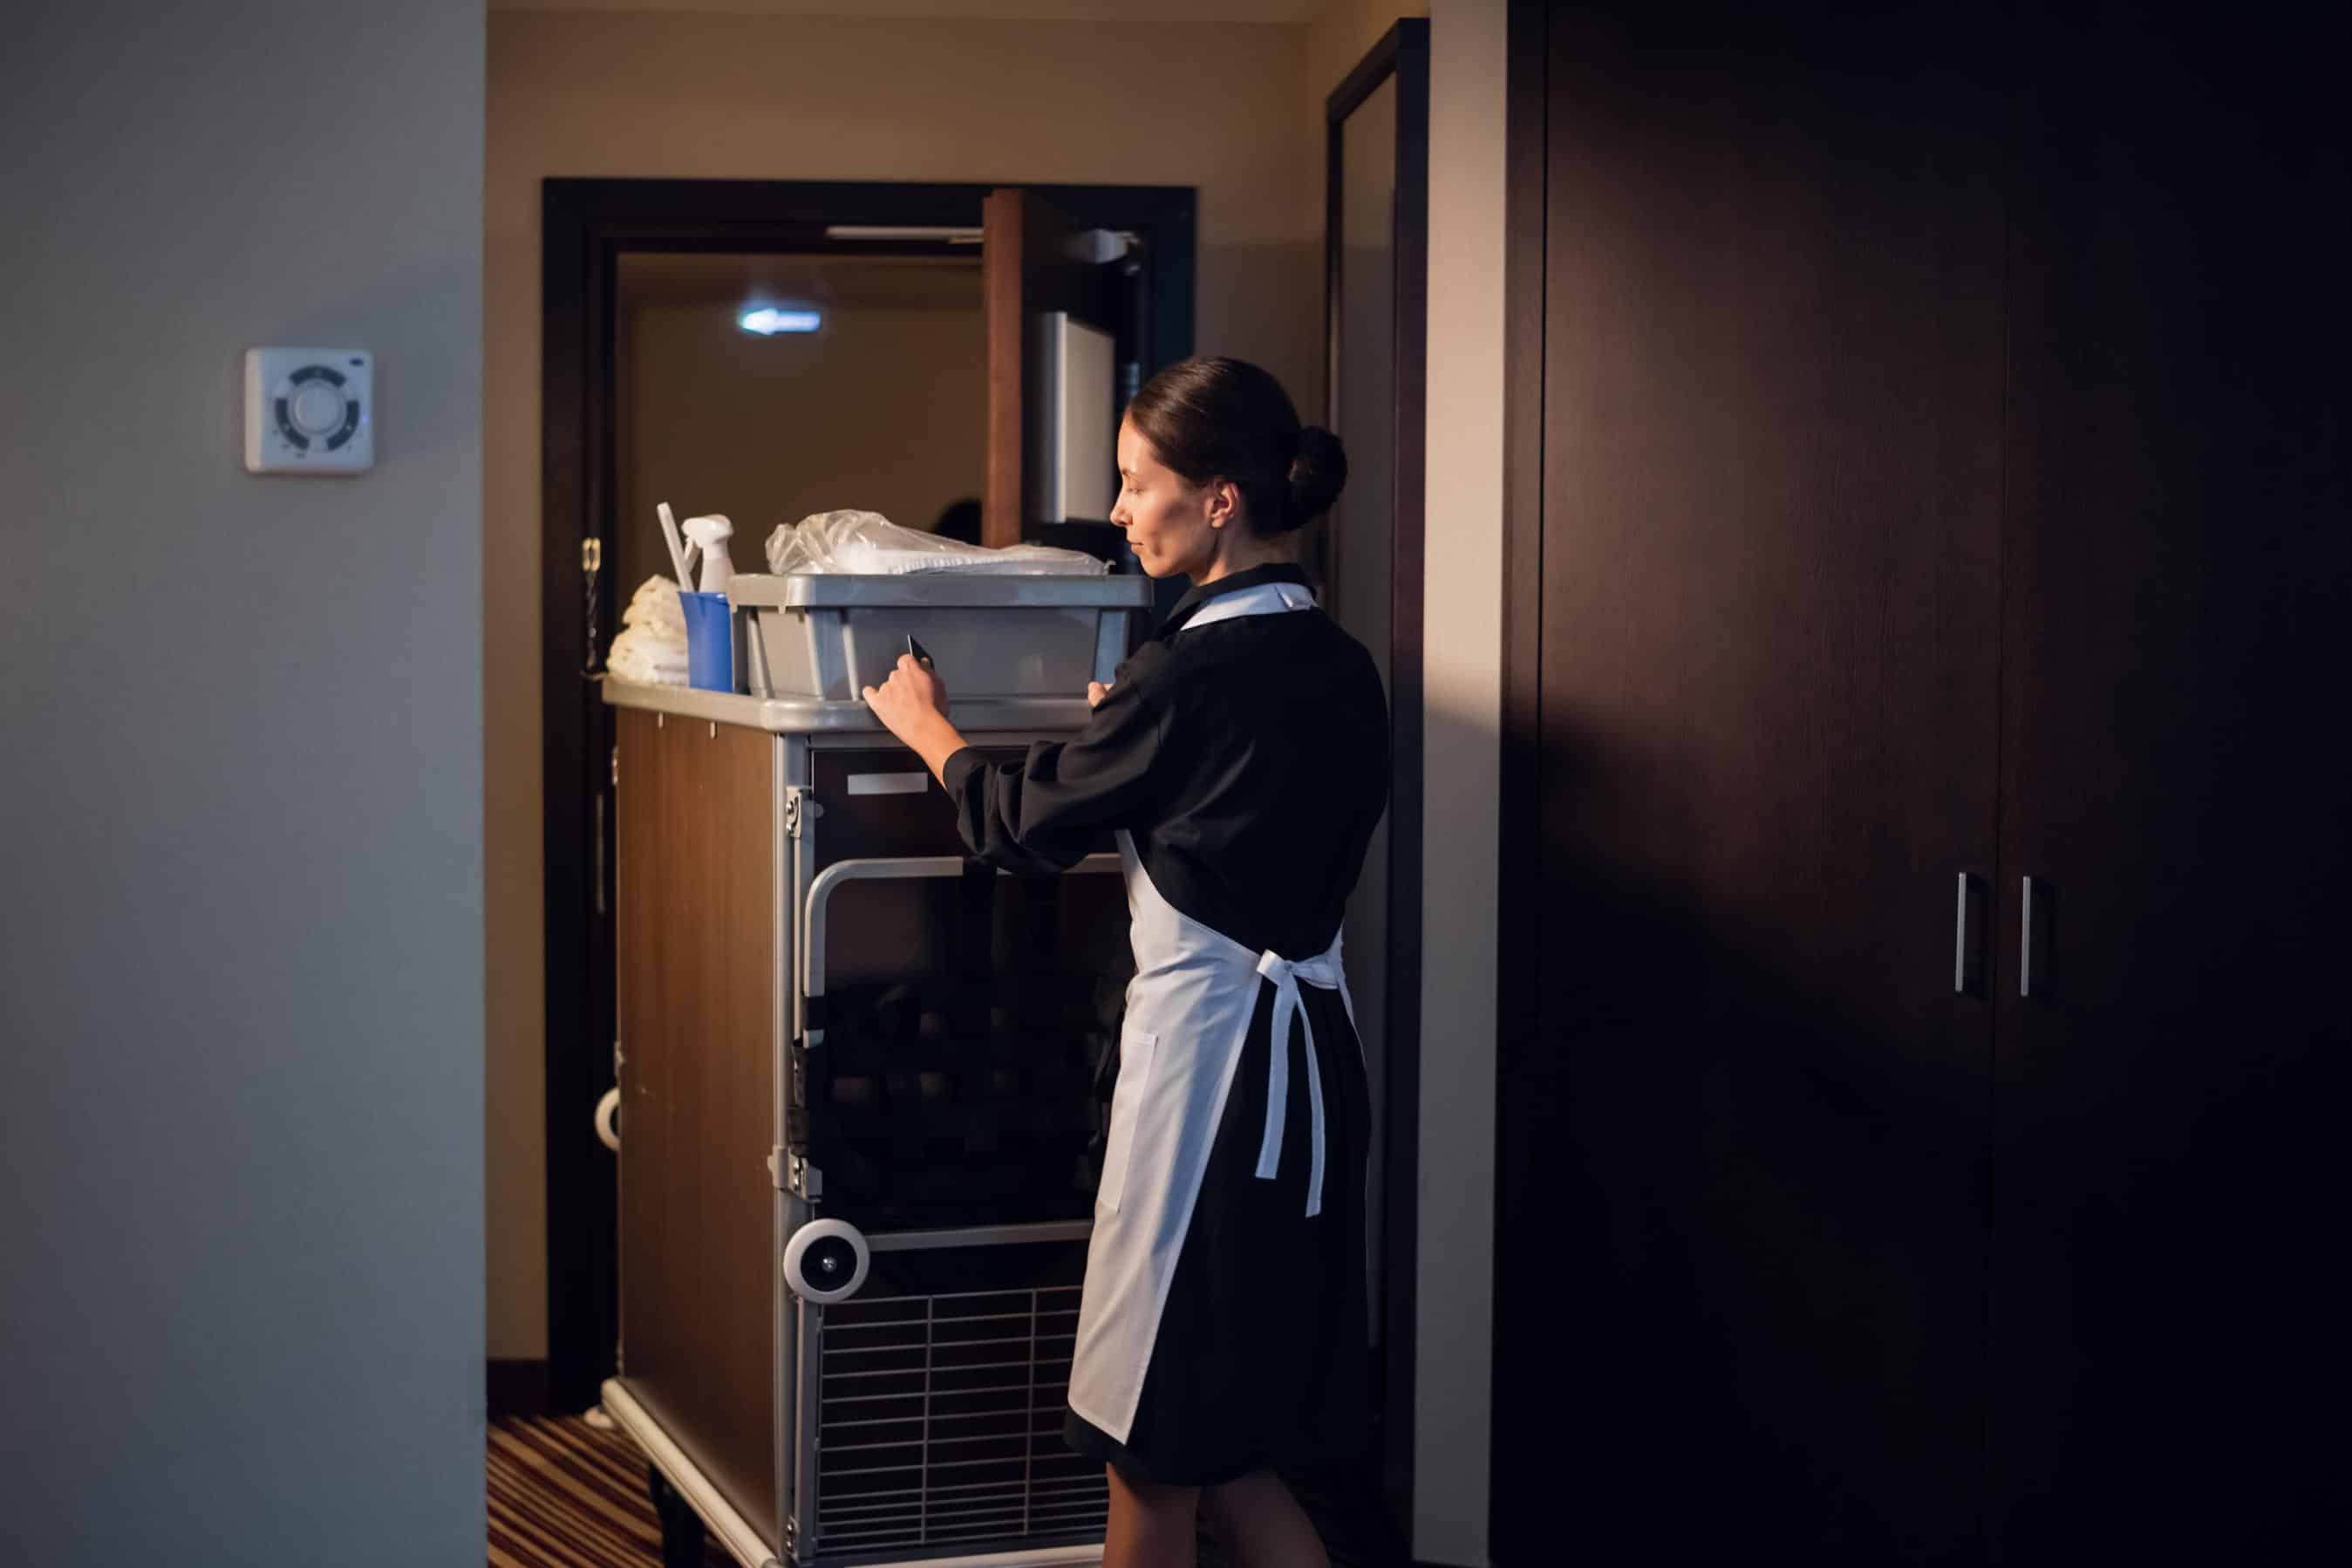 Hotel service. A female housekeeping worker with a trolley entering a room.